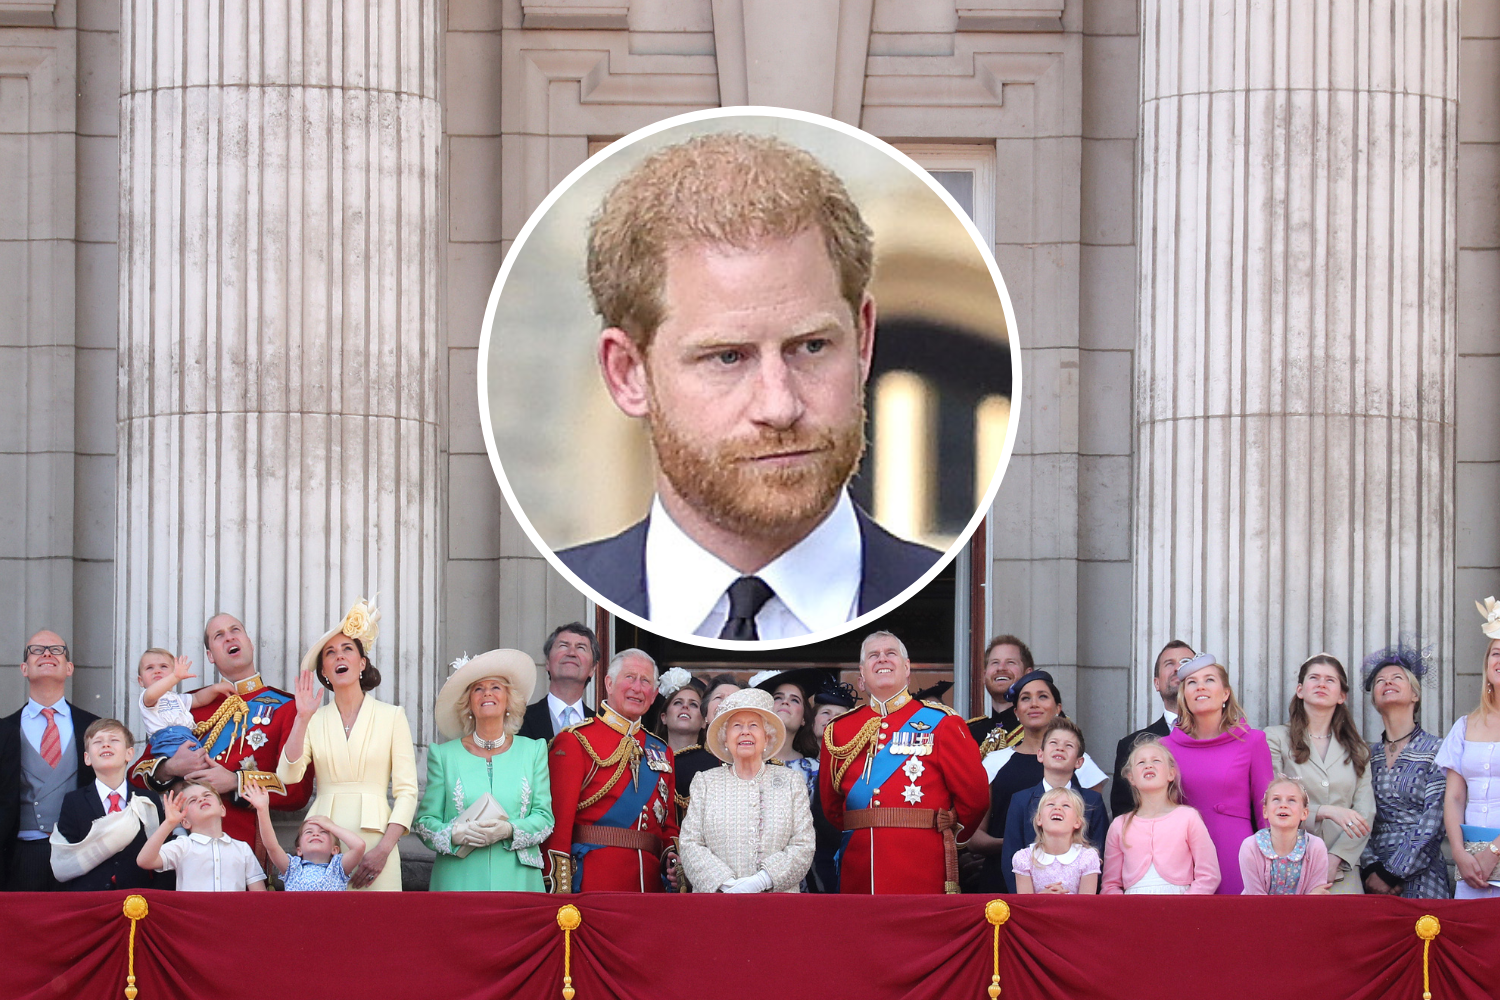 Prince Harry Appears to Accuse 'The Family' of Leaking, Planting Stories